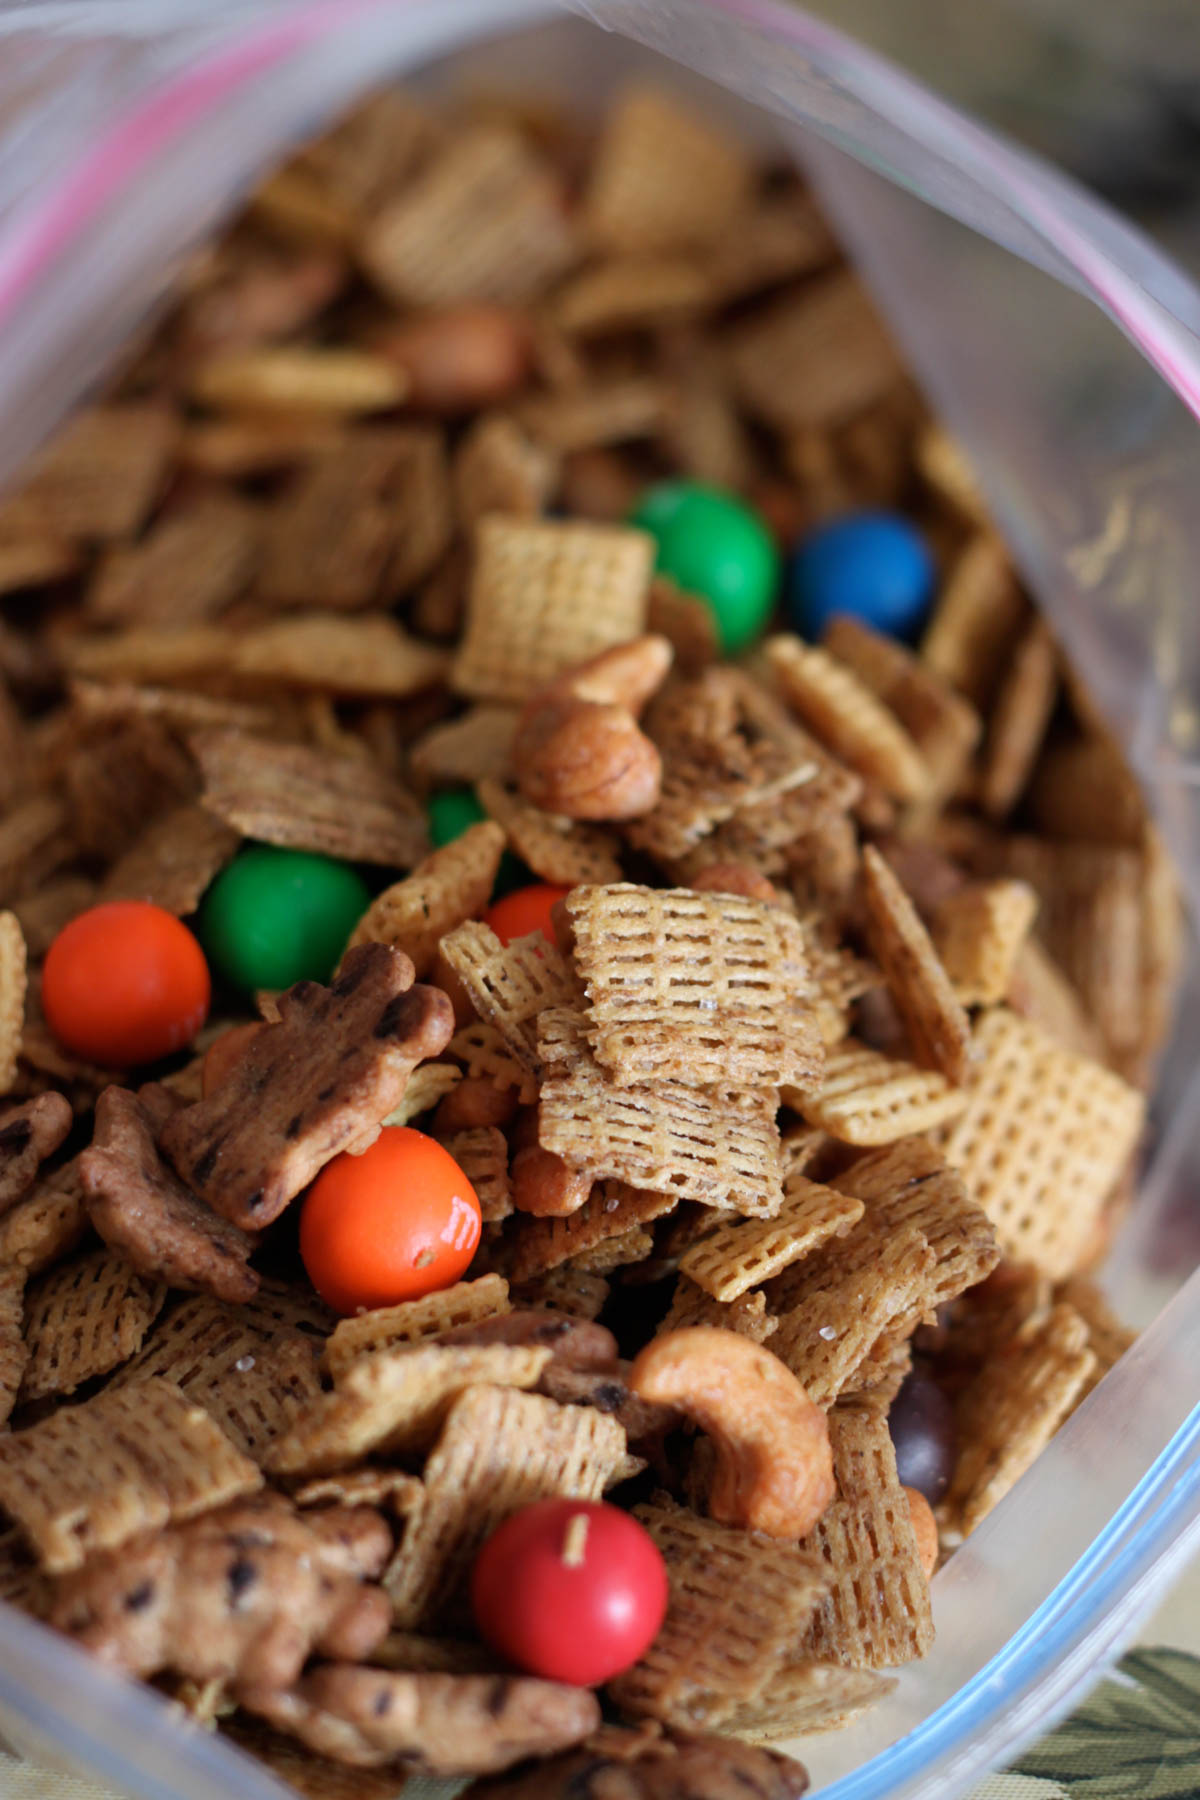 The Chex mix is stored in a plastic zip top bag. You can see all the different mix ins including colorful M&M candies.